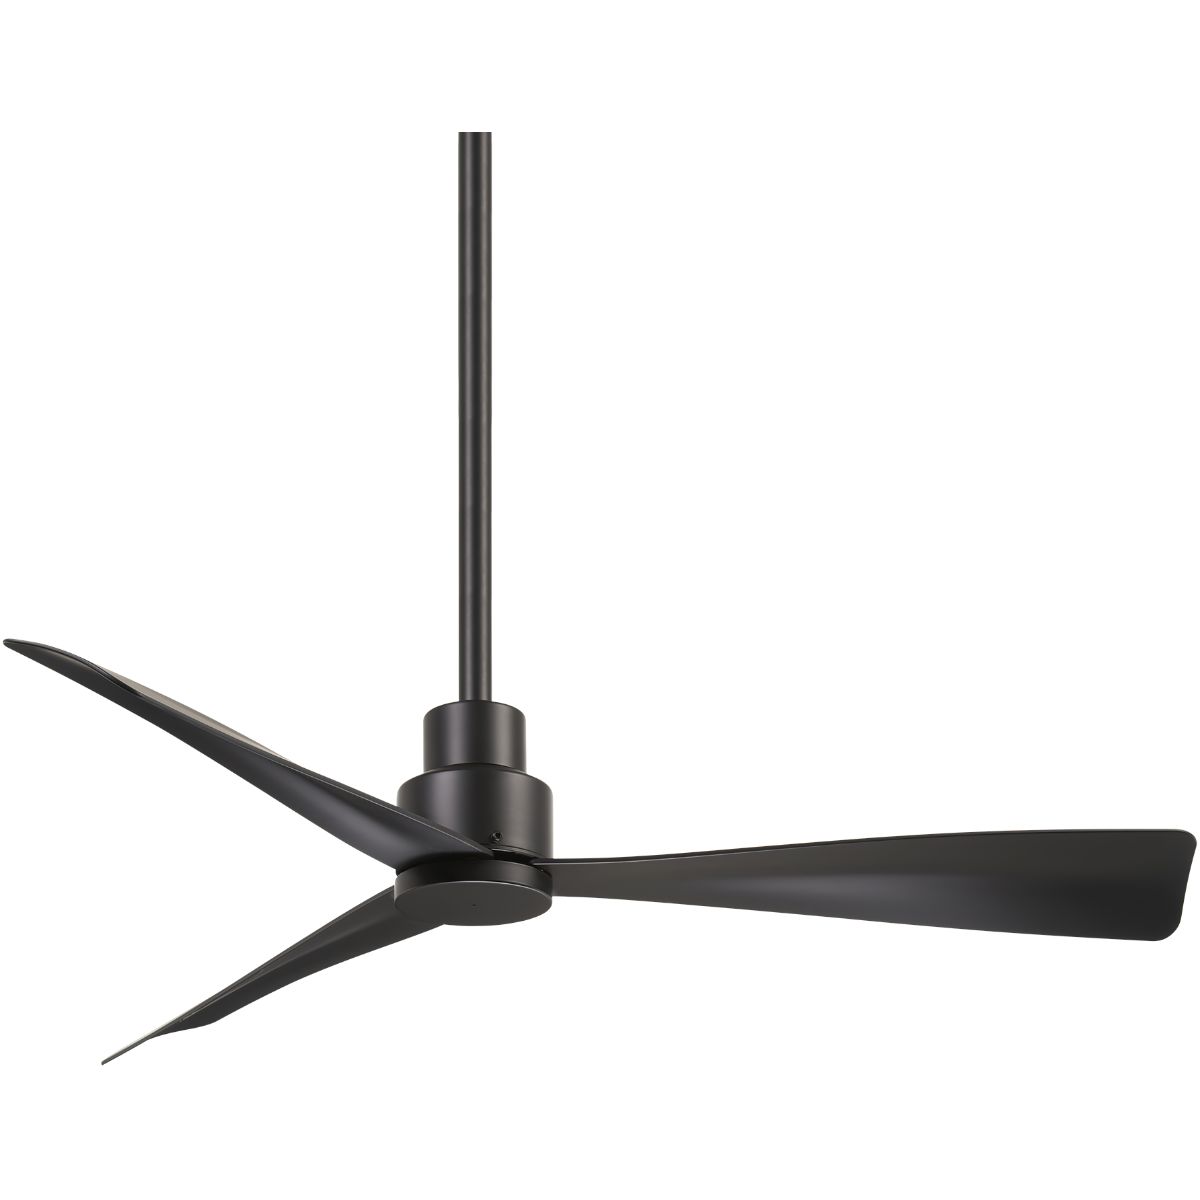 Simple 44 Inch Propeller Outdoor Ceiling Fan With Remote